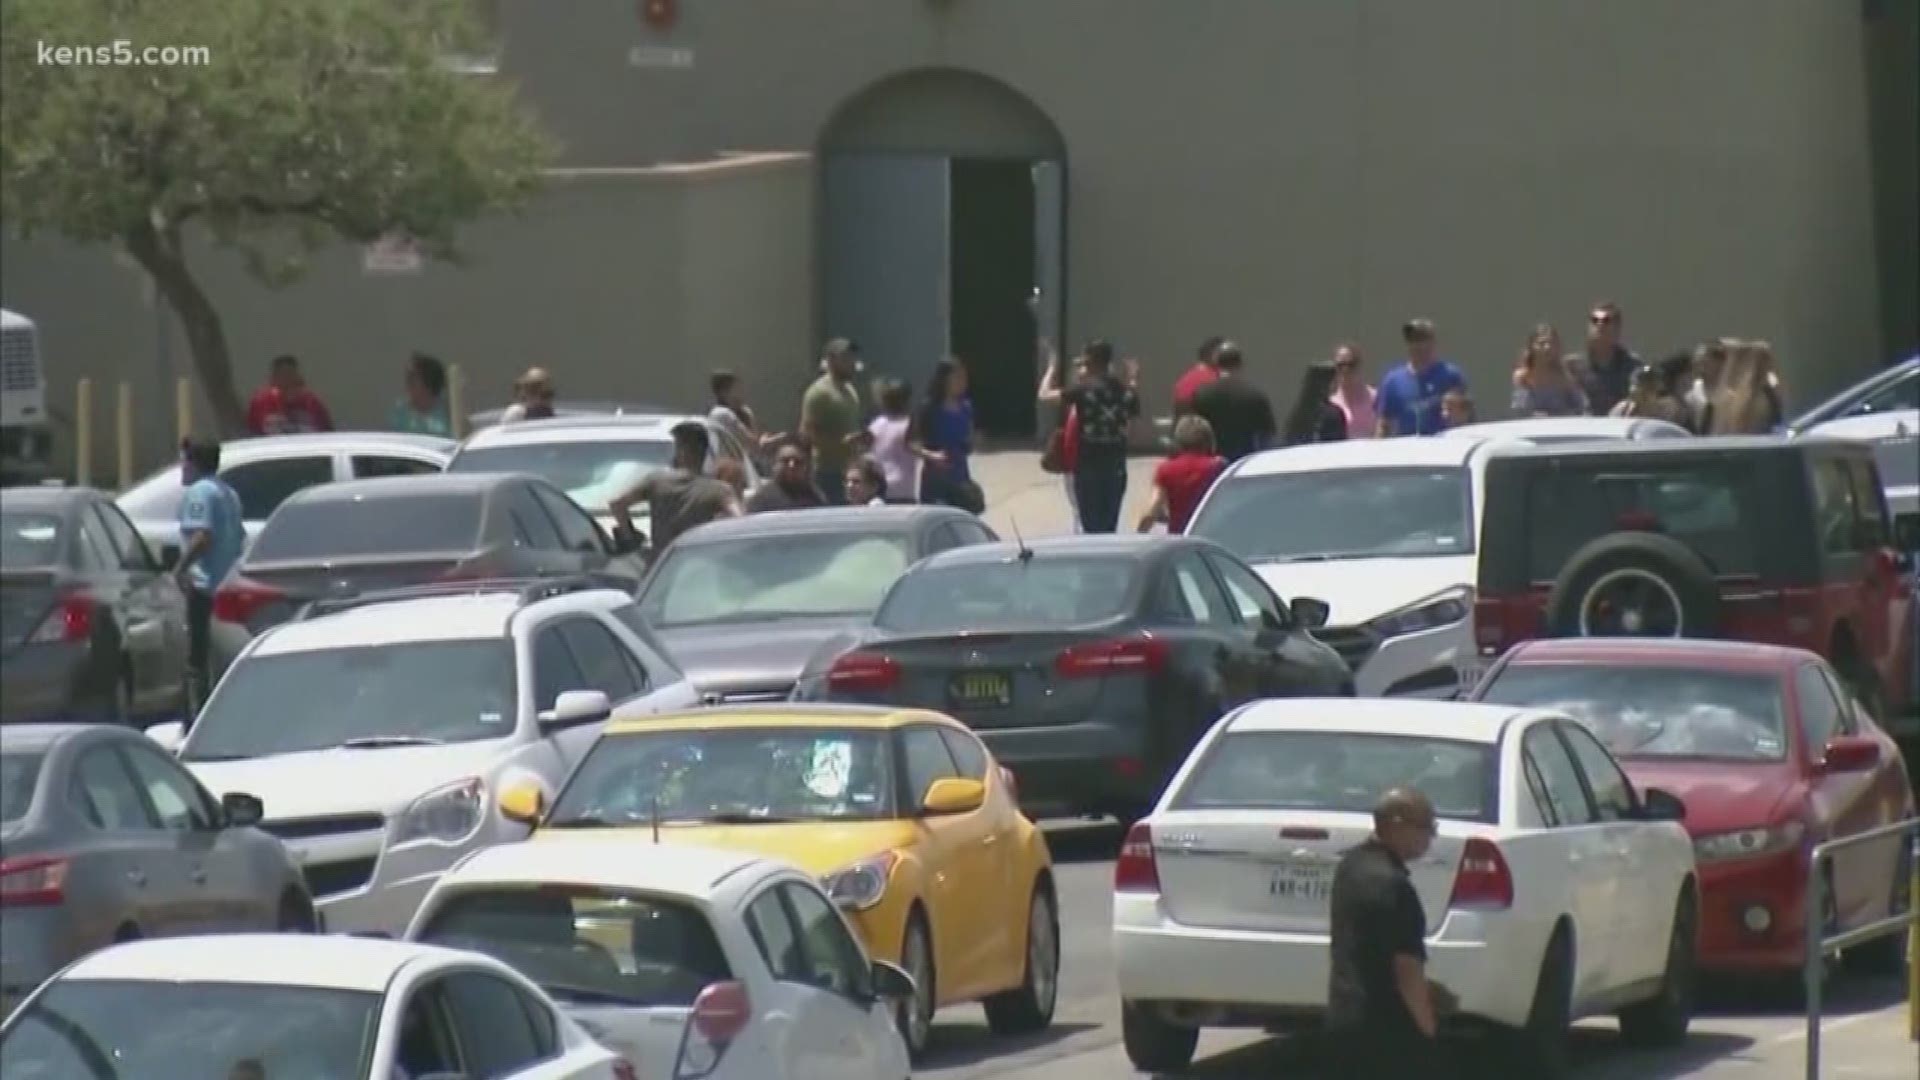 The El Paso shooting took place at a busy shopping center, crowded with families doing back to school shopping.